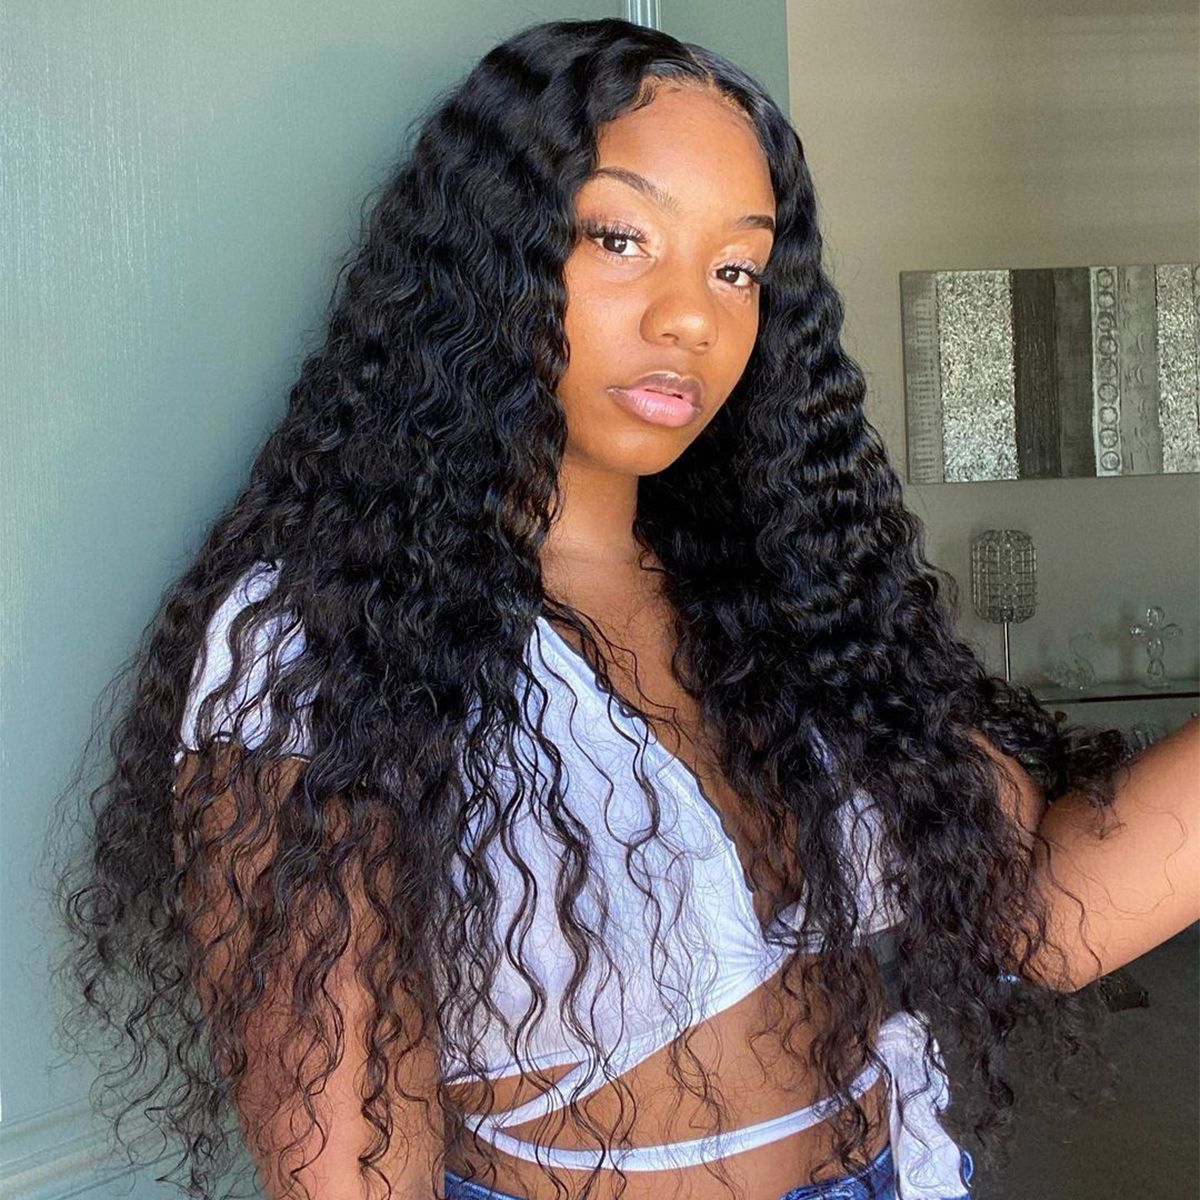 Deep Wave Curly 13x6 Lace Front Wigs | Tinashehair